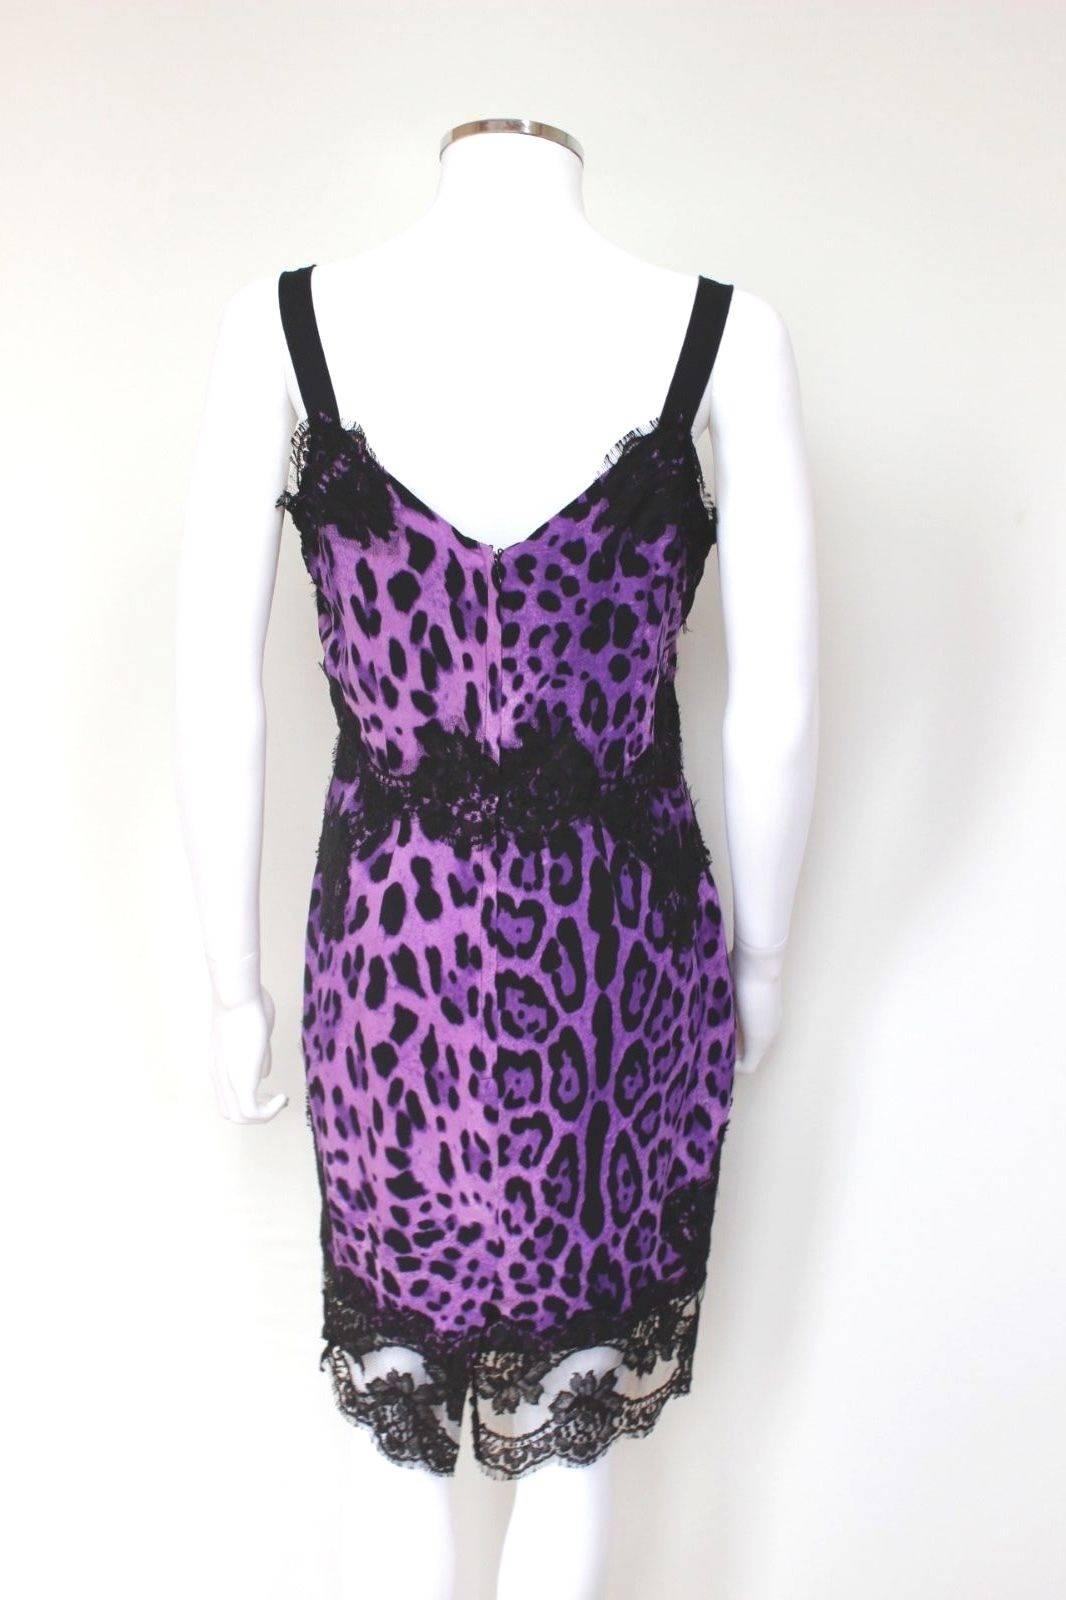 Dolce & Gabbana Black Lace Purple Leopard Print Dress 44 uk 12
There's nothing more flattering than Dolce & Gabbana dresses. 
The Italian brand nails evening wear so there's no occasion that doesn't call for one of its creations.
This stunning Dolce